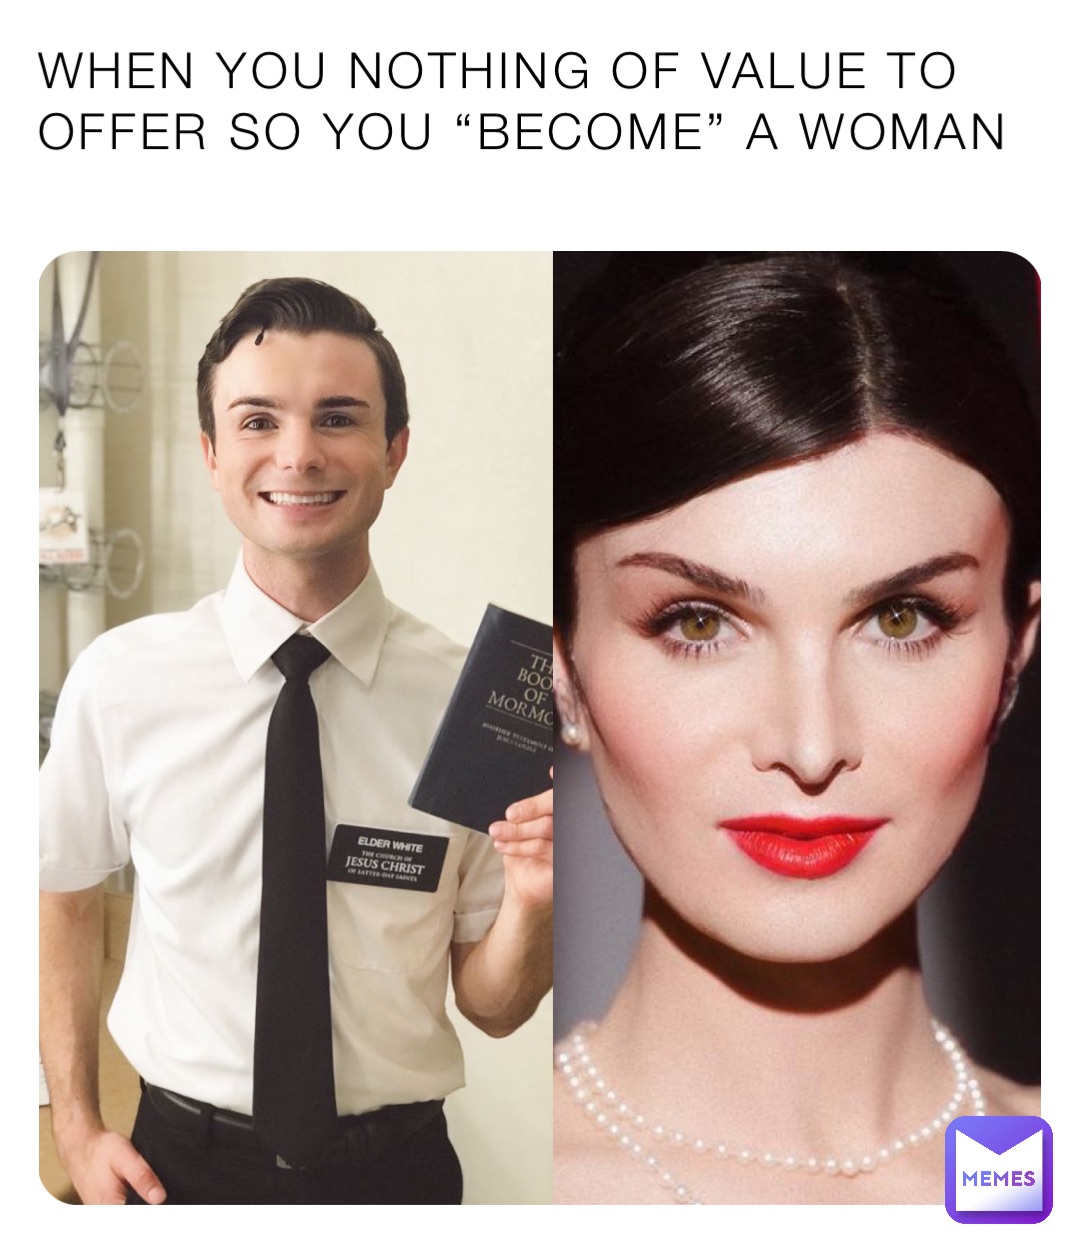 WHEN YOU NOTHING OF VALUE TO OFFER SO YOU “BECOME” A WOMAN